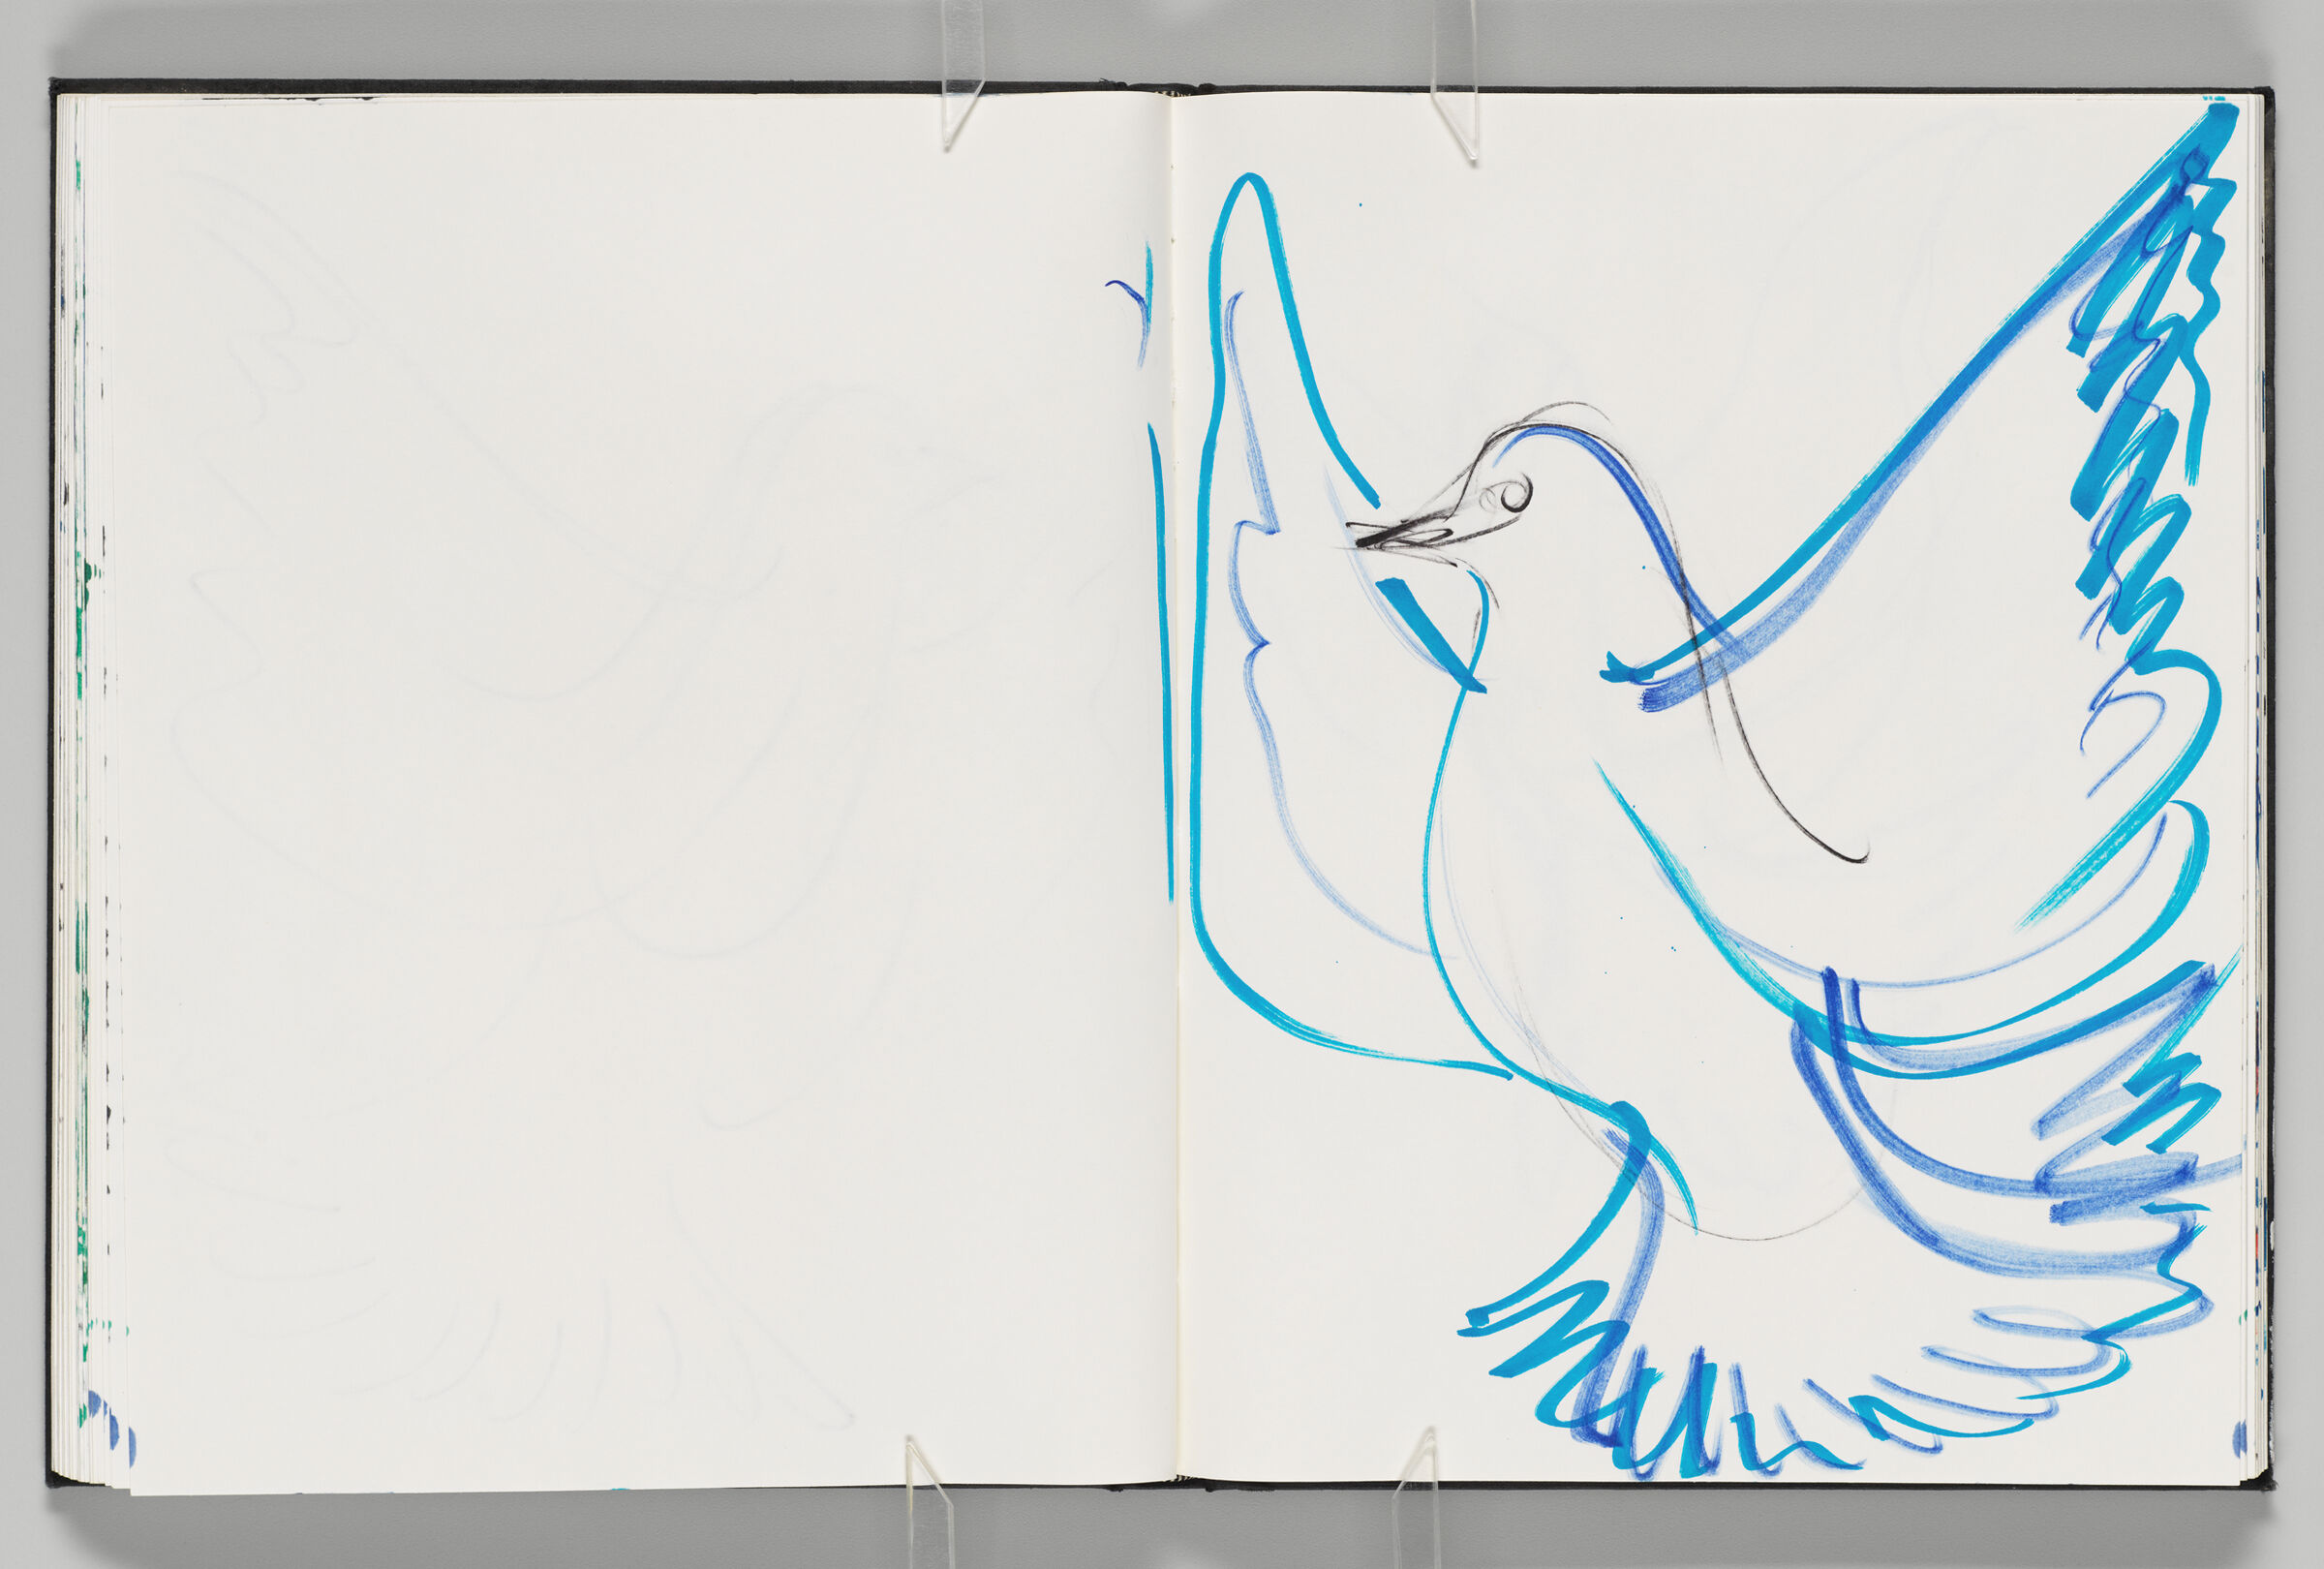 Untitled (Blank, Left Page); Untitled (Dove, Right Page)